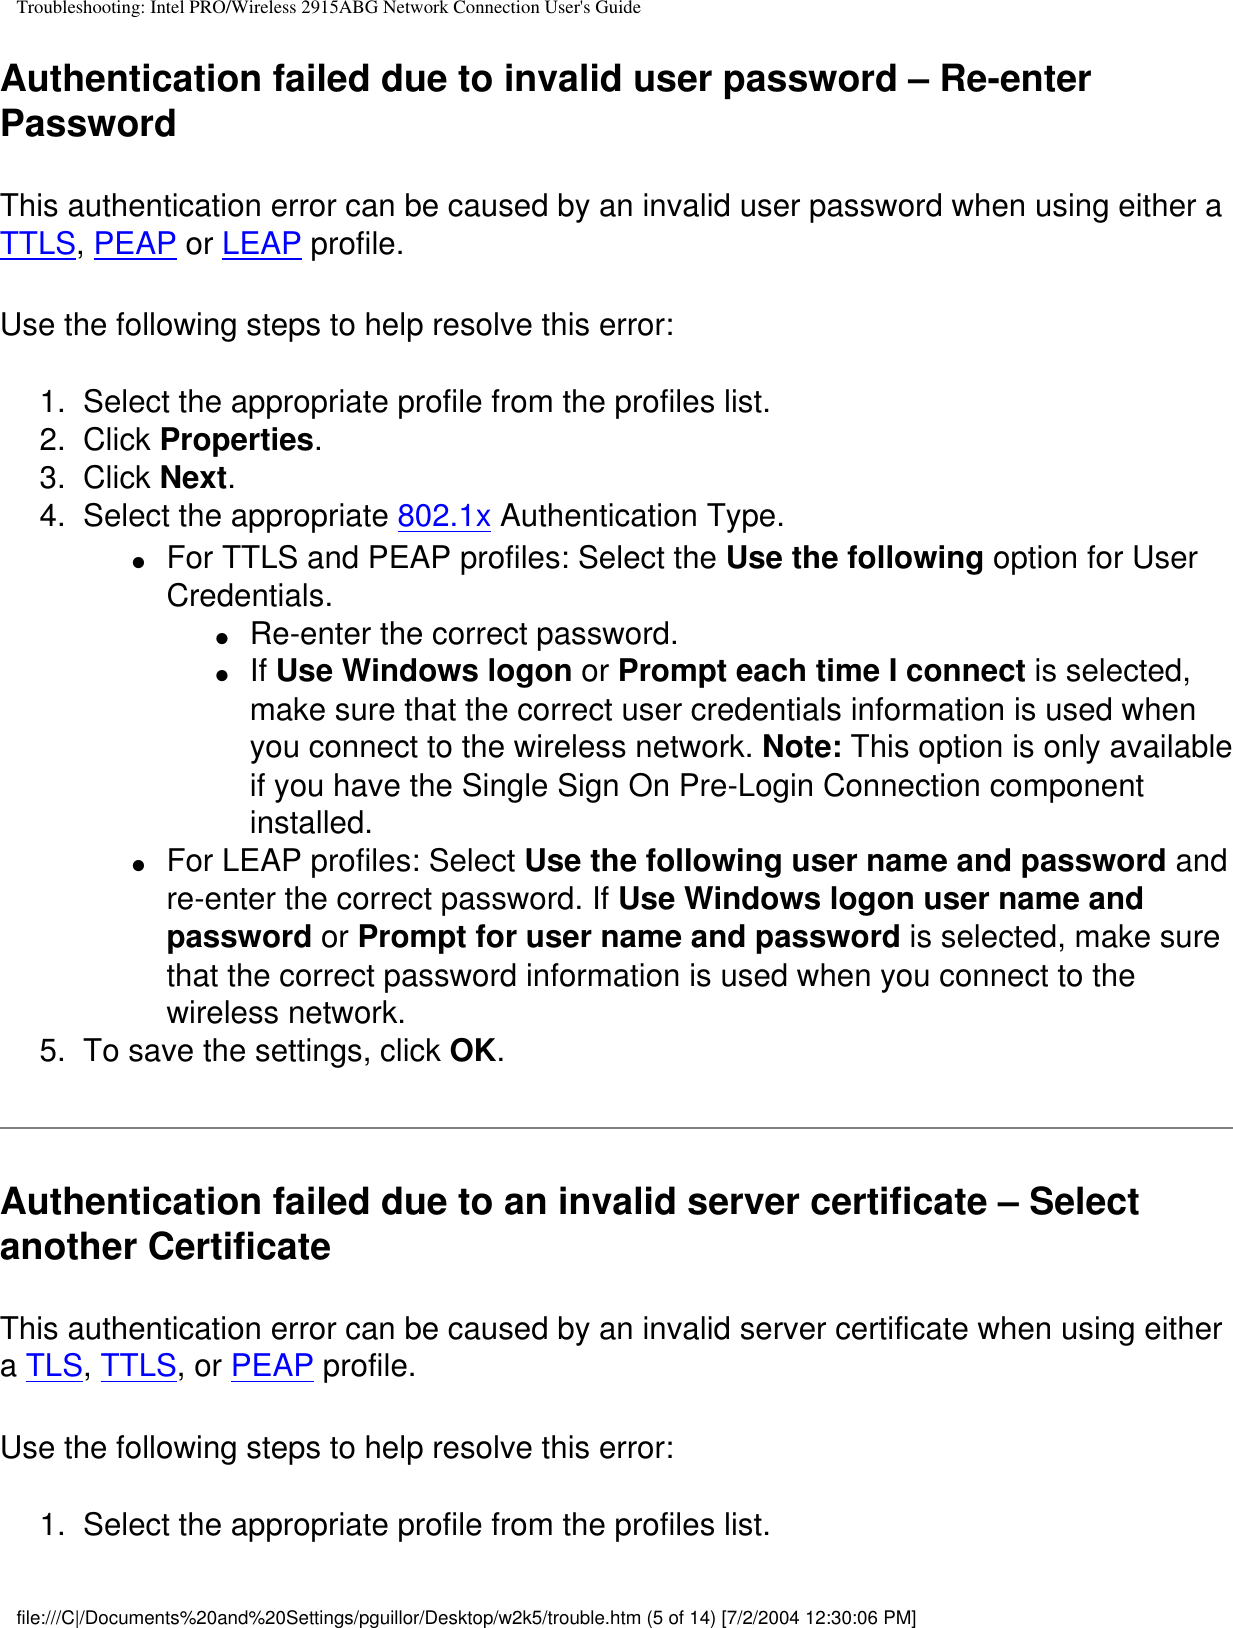 Troubleshooting: Intel PRO/Wireless 2915ABG Network Connection User&apos;s GuideAuthentication failed due to invalid user password – Re-enter PasswordThis authentication error can be caused by an invalid user password when using either a TTLS, PEAP or LEAP profile.   Use the following steps to help resolve this error:1.  Select the appropriate profile from the profiles list. 2.  Click Properties. 3.  Click Next.4.  Select the appropriate 802.1x Authentication Type.●     For TTLS and PEAP profiles: Select the Use the following option for User Credentials.●     Re-enter the correct password.●     If Use Windows logon or Prompt each time I connect is selected, make sure that the correct user credentials information is used when you connect to the wireless network. Note: This option is only available if you have the Single Sign On Pre-Login Connection component installed.●     For LEAP profiles: Select Use the following user name and password and re-enter the correct password. If Use Windows logon user name and password or Prompt for user name and password is selected, make sure that the correct password information is used when you connect to the wireless network.5.  To save the settings, click OK. Authentication failed due to an invalid server certificate – Select another Certificate This authentication error can be caused by an invalid server certificate when using either a TLS, TTLS, or PEAP profile.   Use the following steps to help resolve this error:1.  Select the appropriate profile from the profiles list. file:///C|/Documents%20and%20Settings/pguillor/Desktop/w2k5/trouble.htm (5 of 14) [7/2/2004 12:30:06 PM]